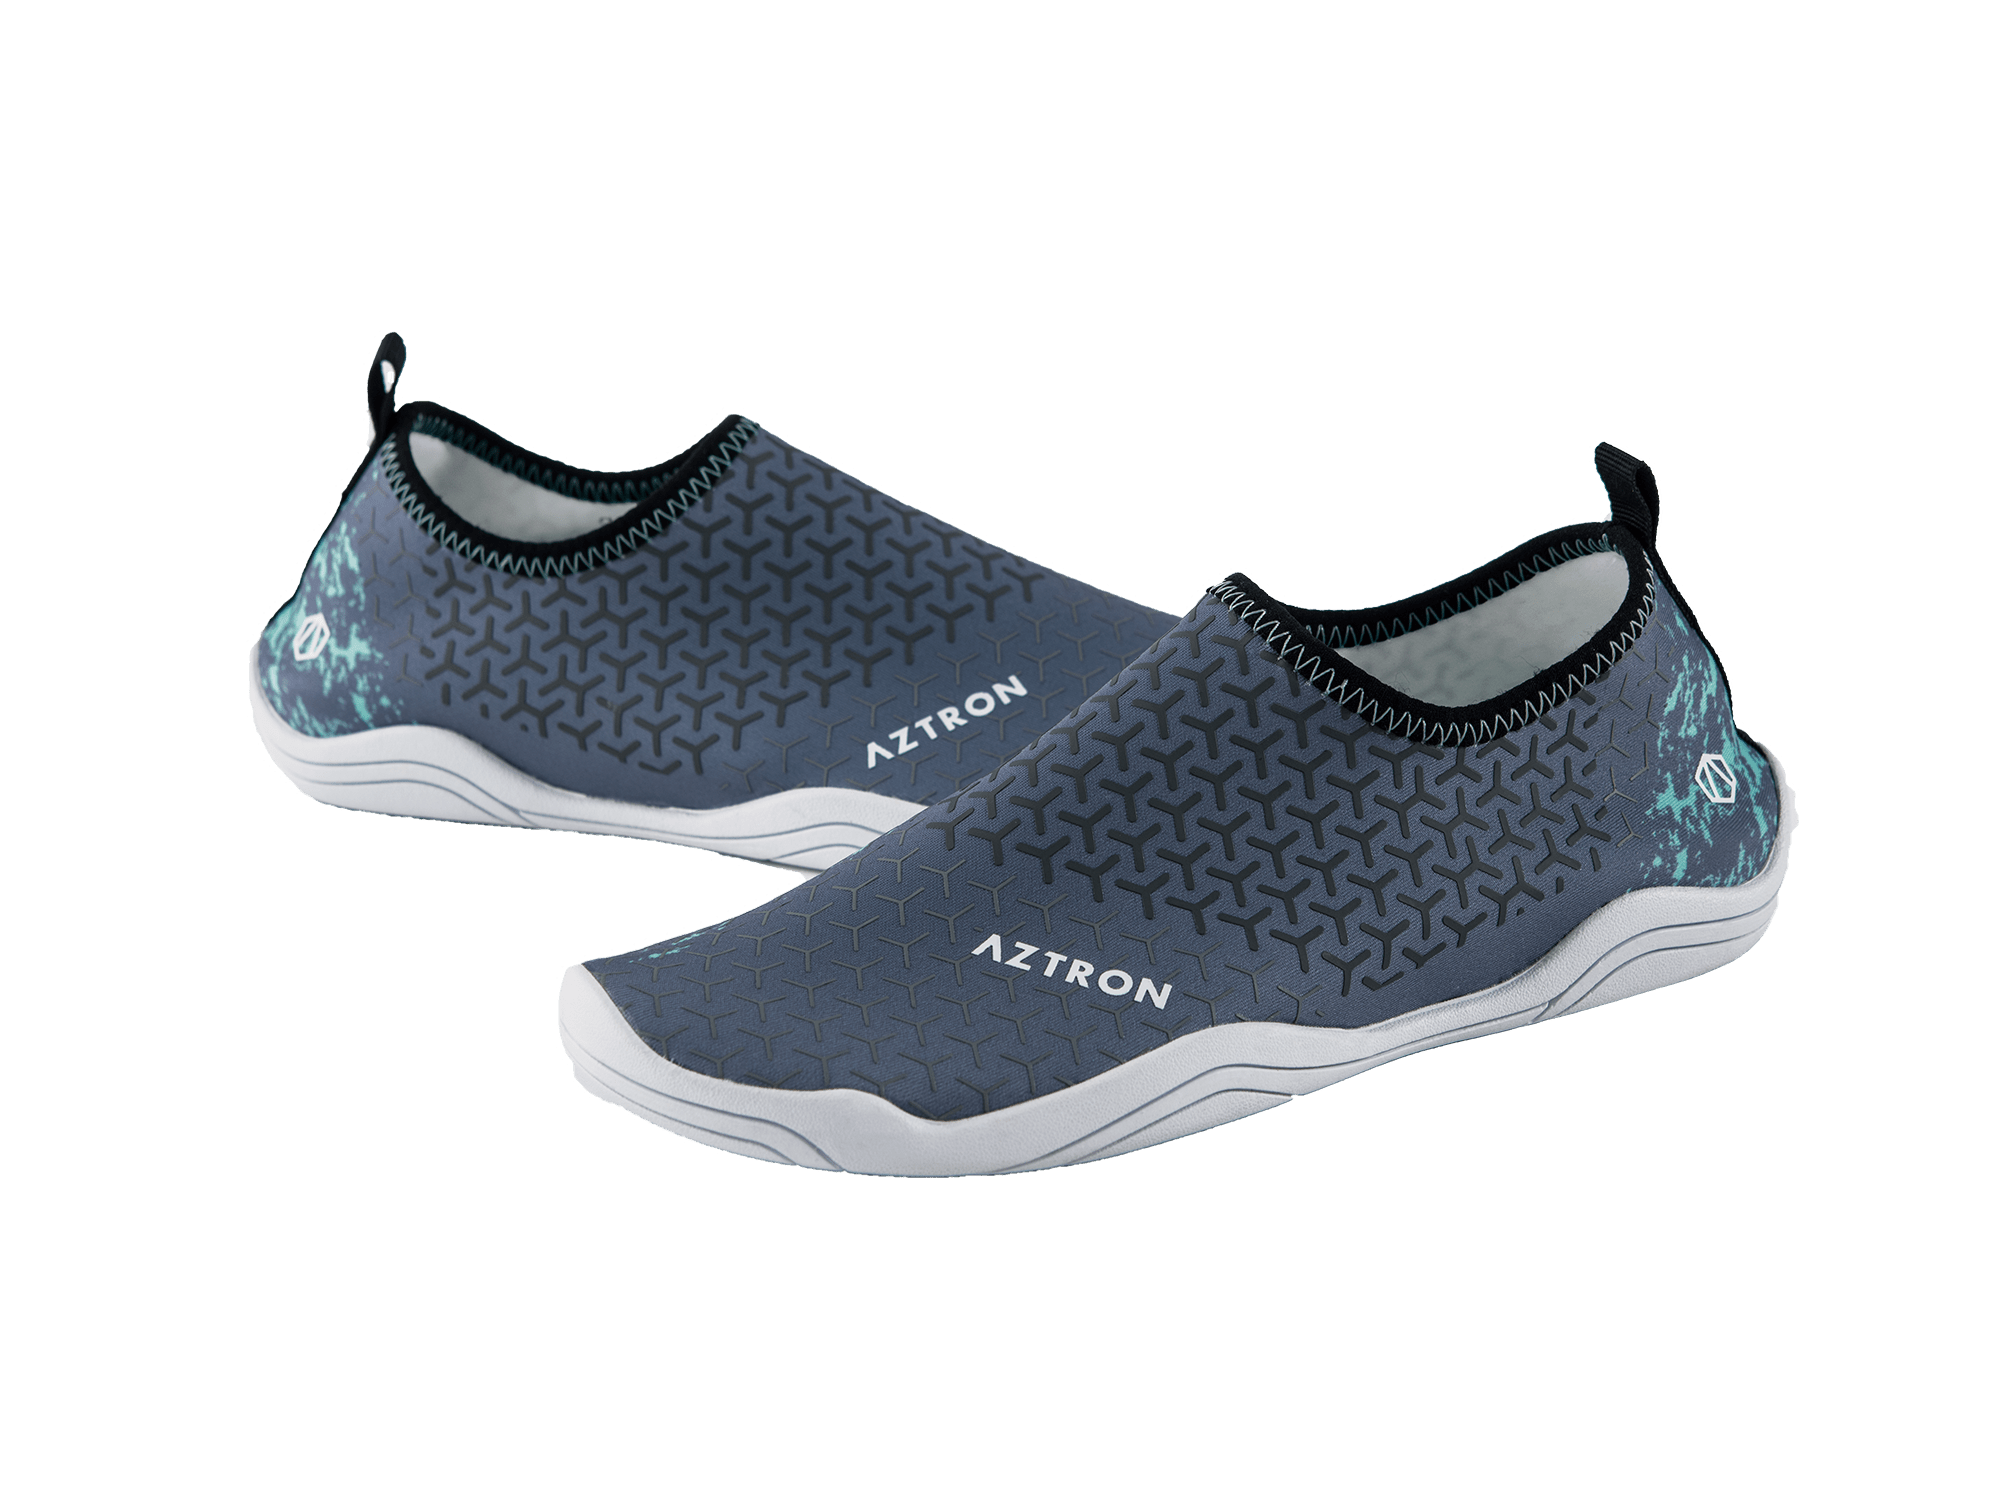 Aztron GEMINI-II WATER SHOES Mens 5.5 Womens 7-Paddleboard Accessories-Aztron Sports-2